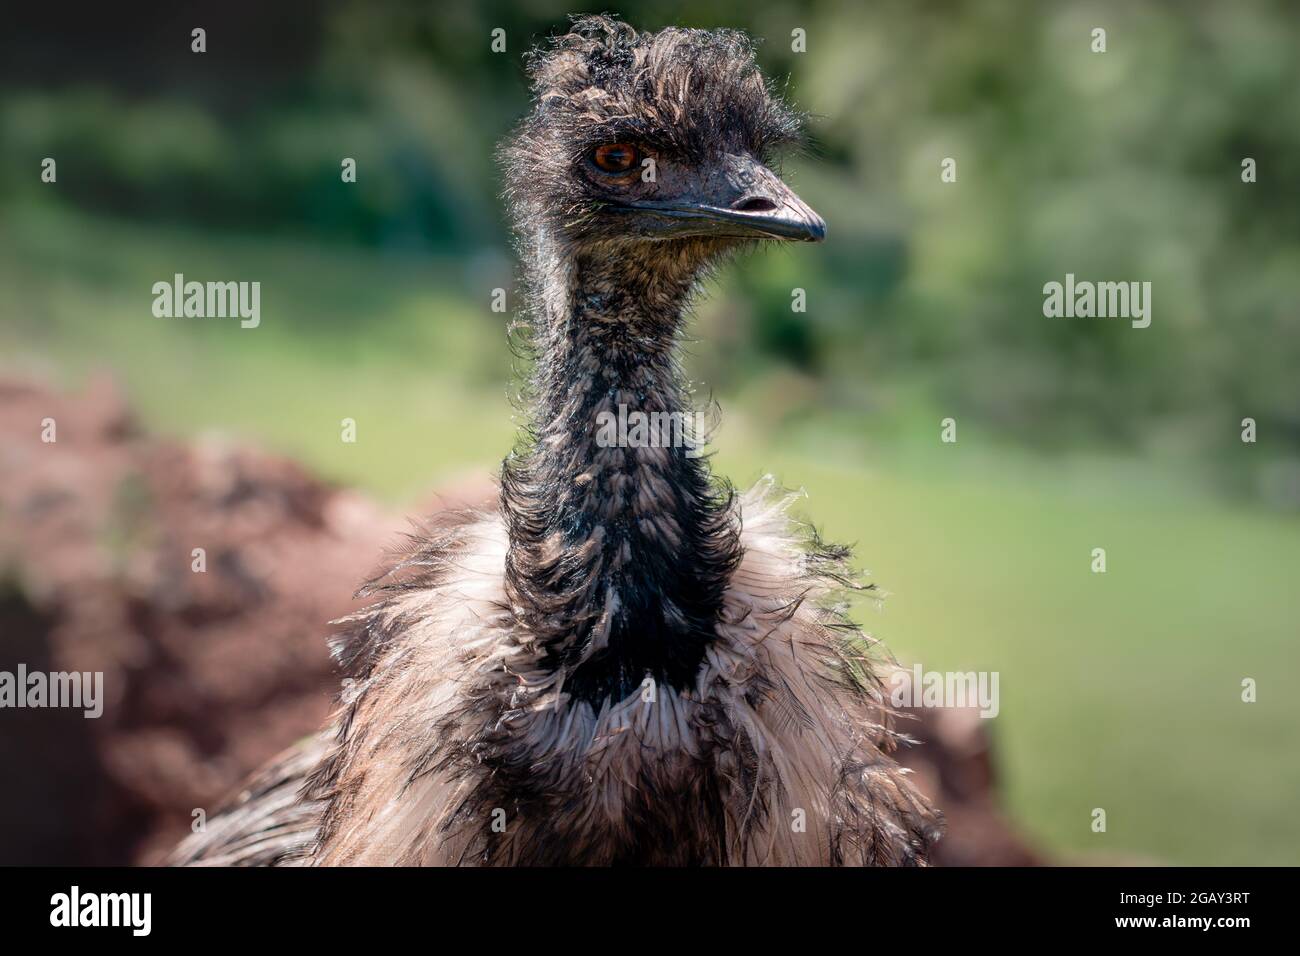 Close up of neck, head and ruffle feathers of emu looking at camera ...